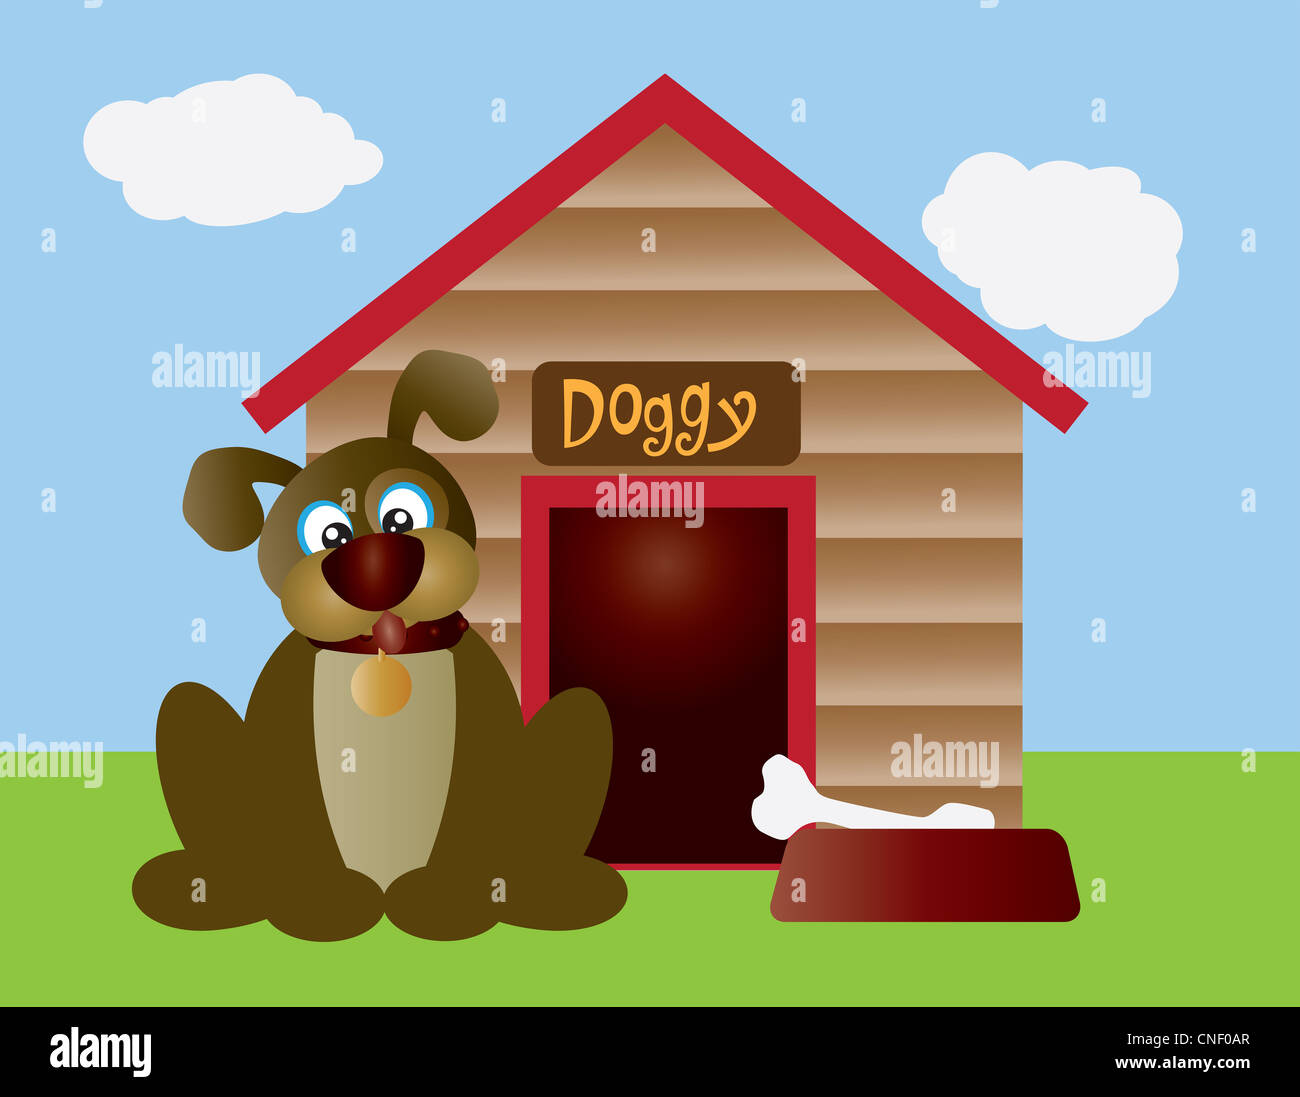 Cute Puppy Dog with Dog Bone in Dish and Dog House Illustration Stock Photo